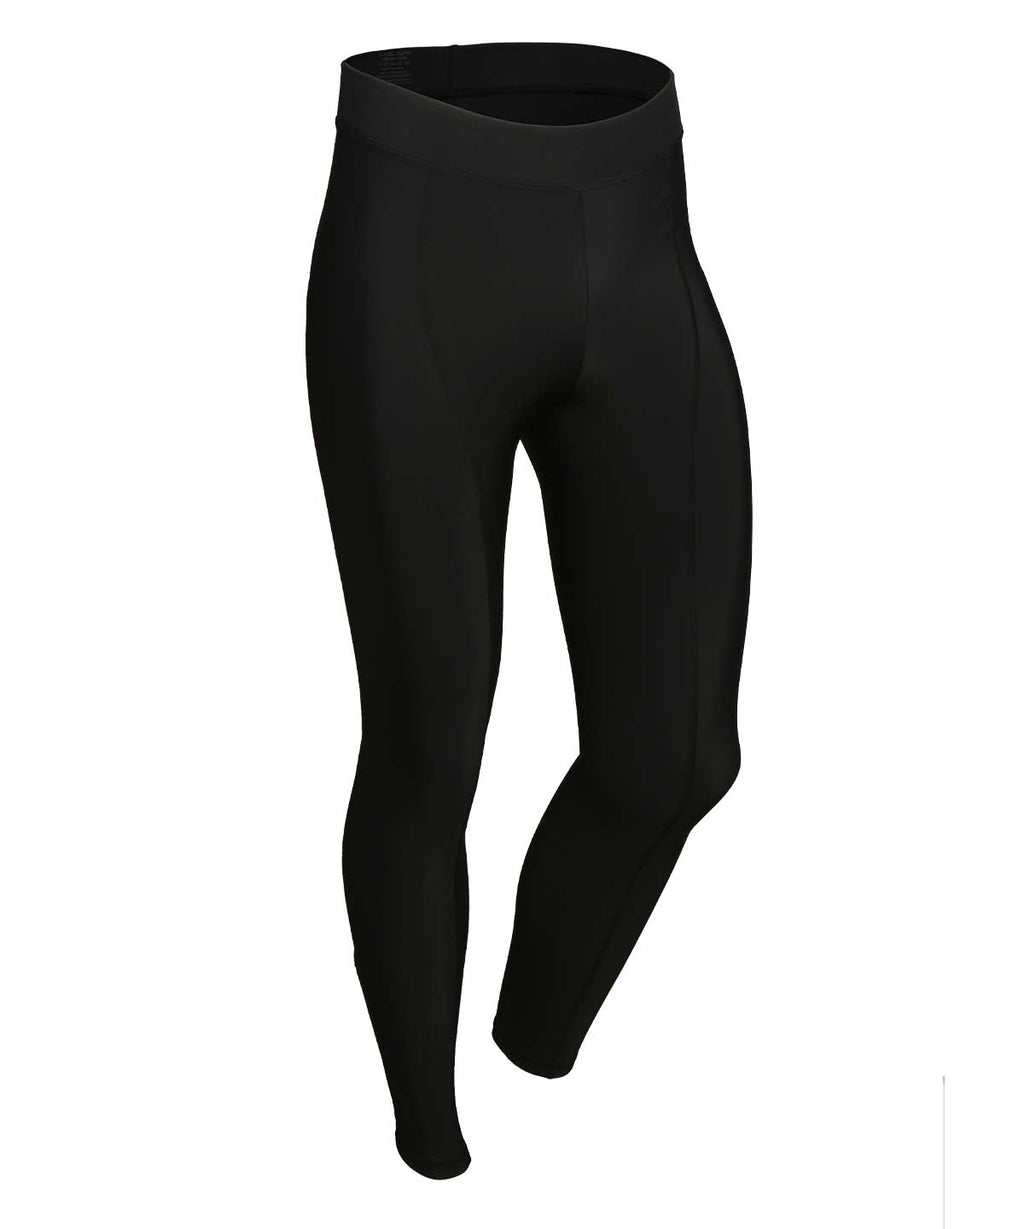 M'S ARTICO X THERMAL TIGHTS